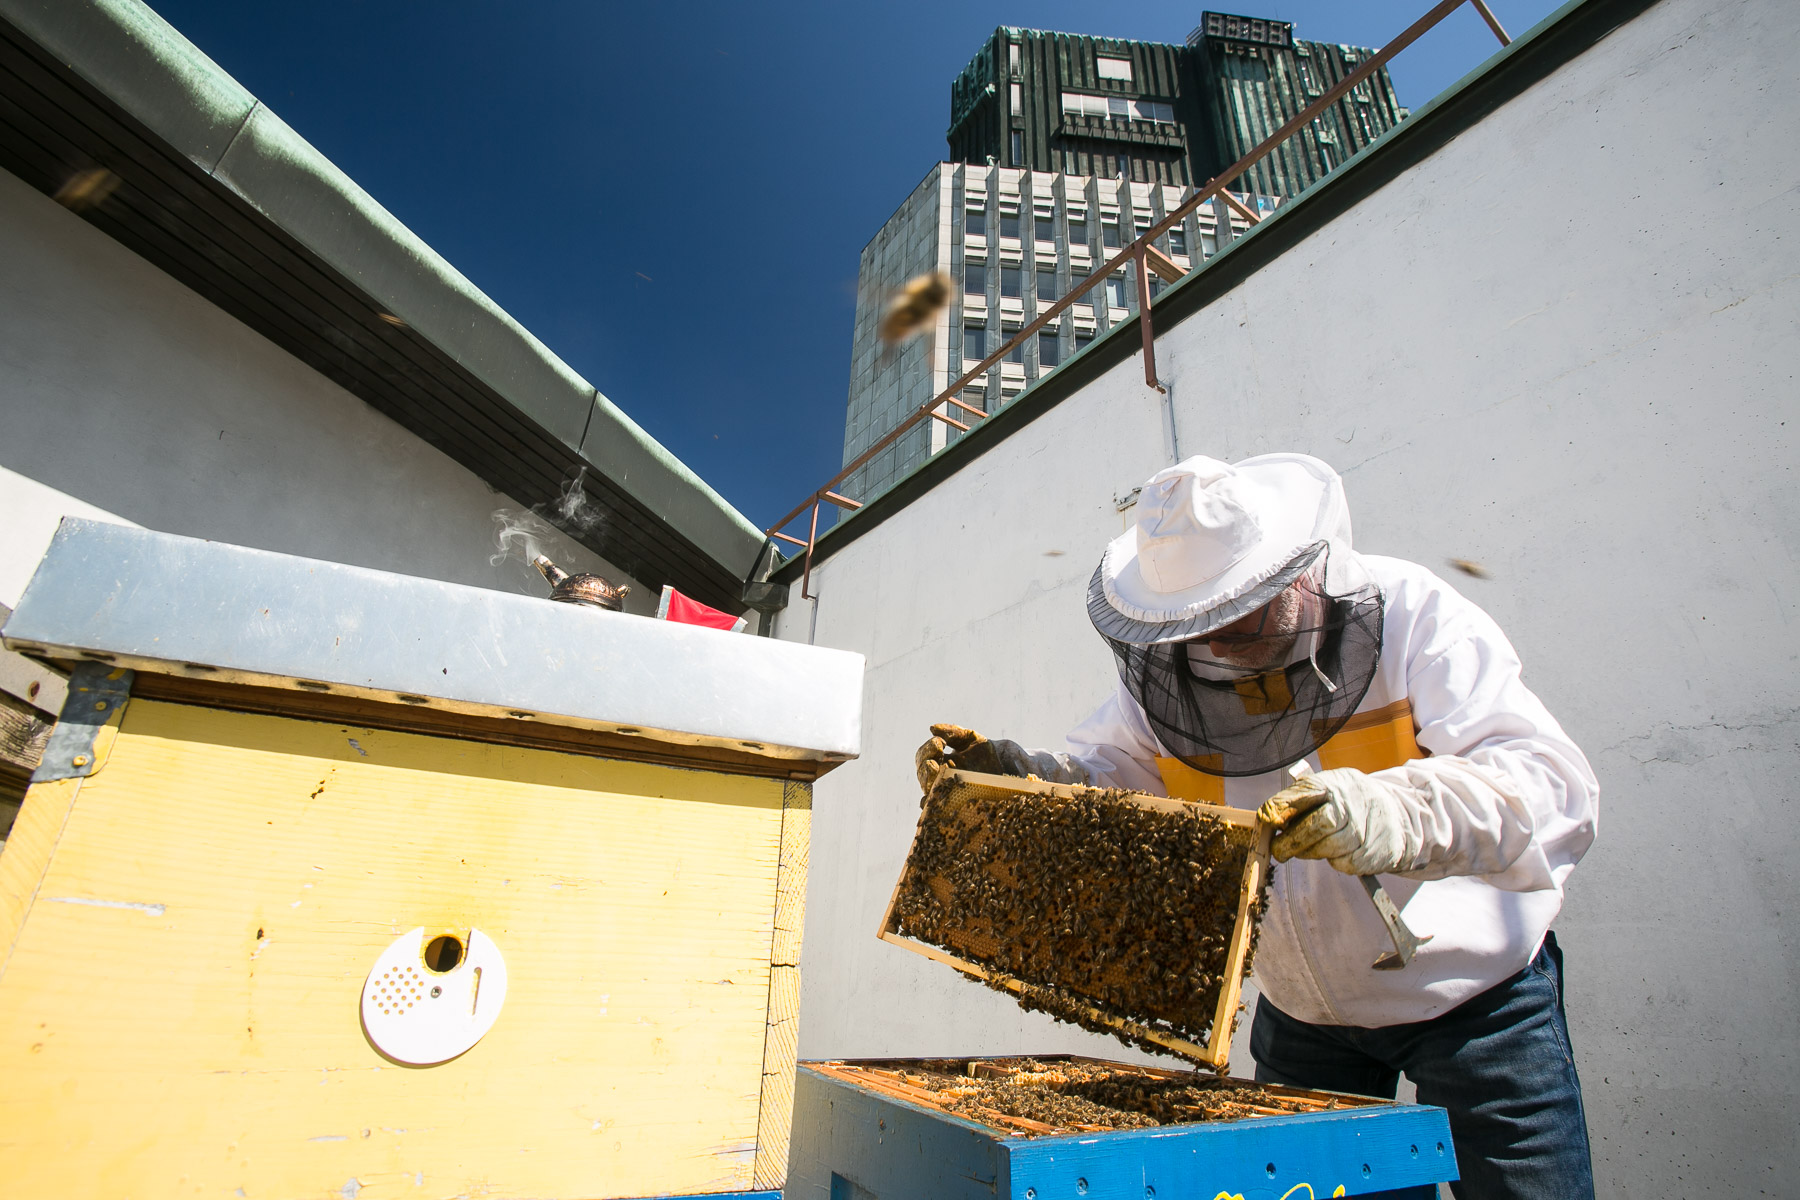 Urban beekeeper Franc Petrovčič inspects beehives on the rooftop of the Cankarjev dom cultural and congress center. In 2008, these were the first rooftop beehives in Ljubljana.